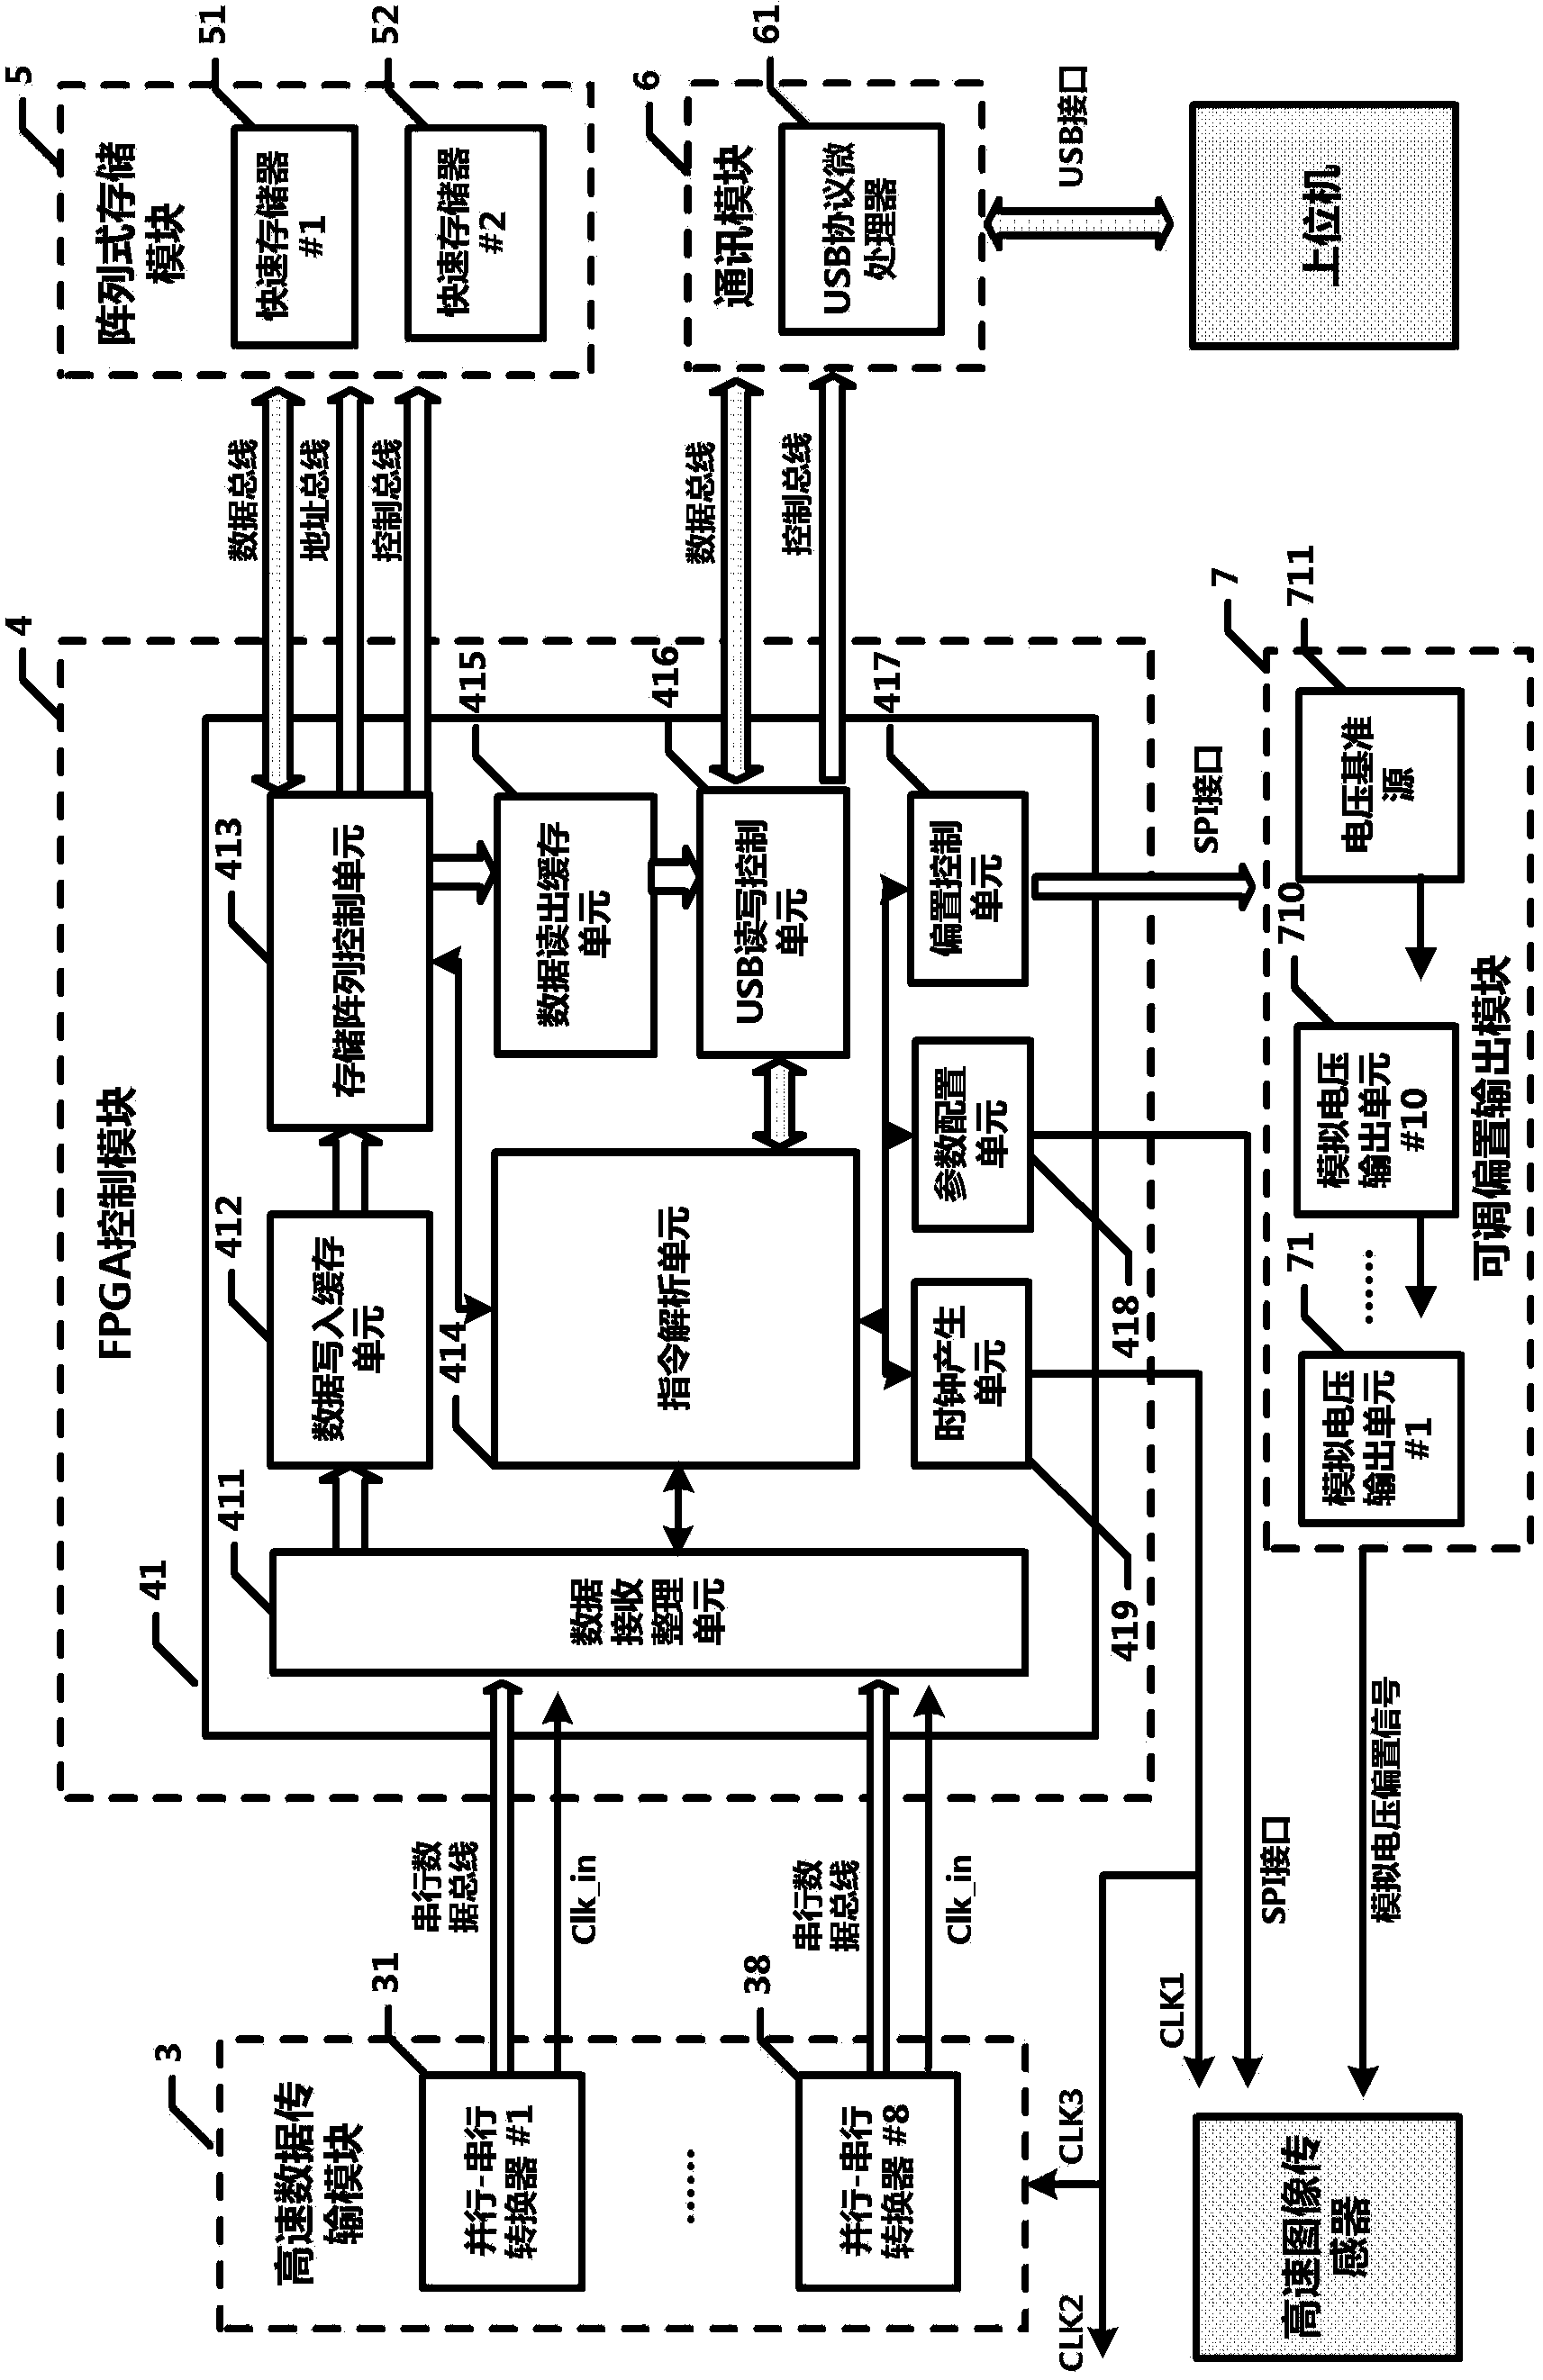 Field programmable gate array (FPGA) based multichannel high-speed image data acquisition and storage system